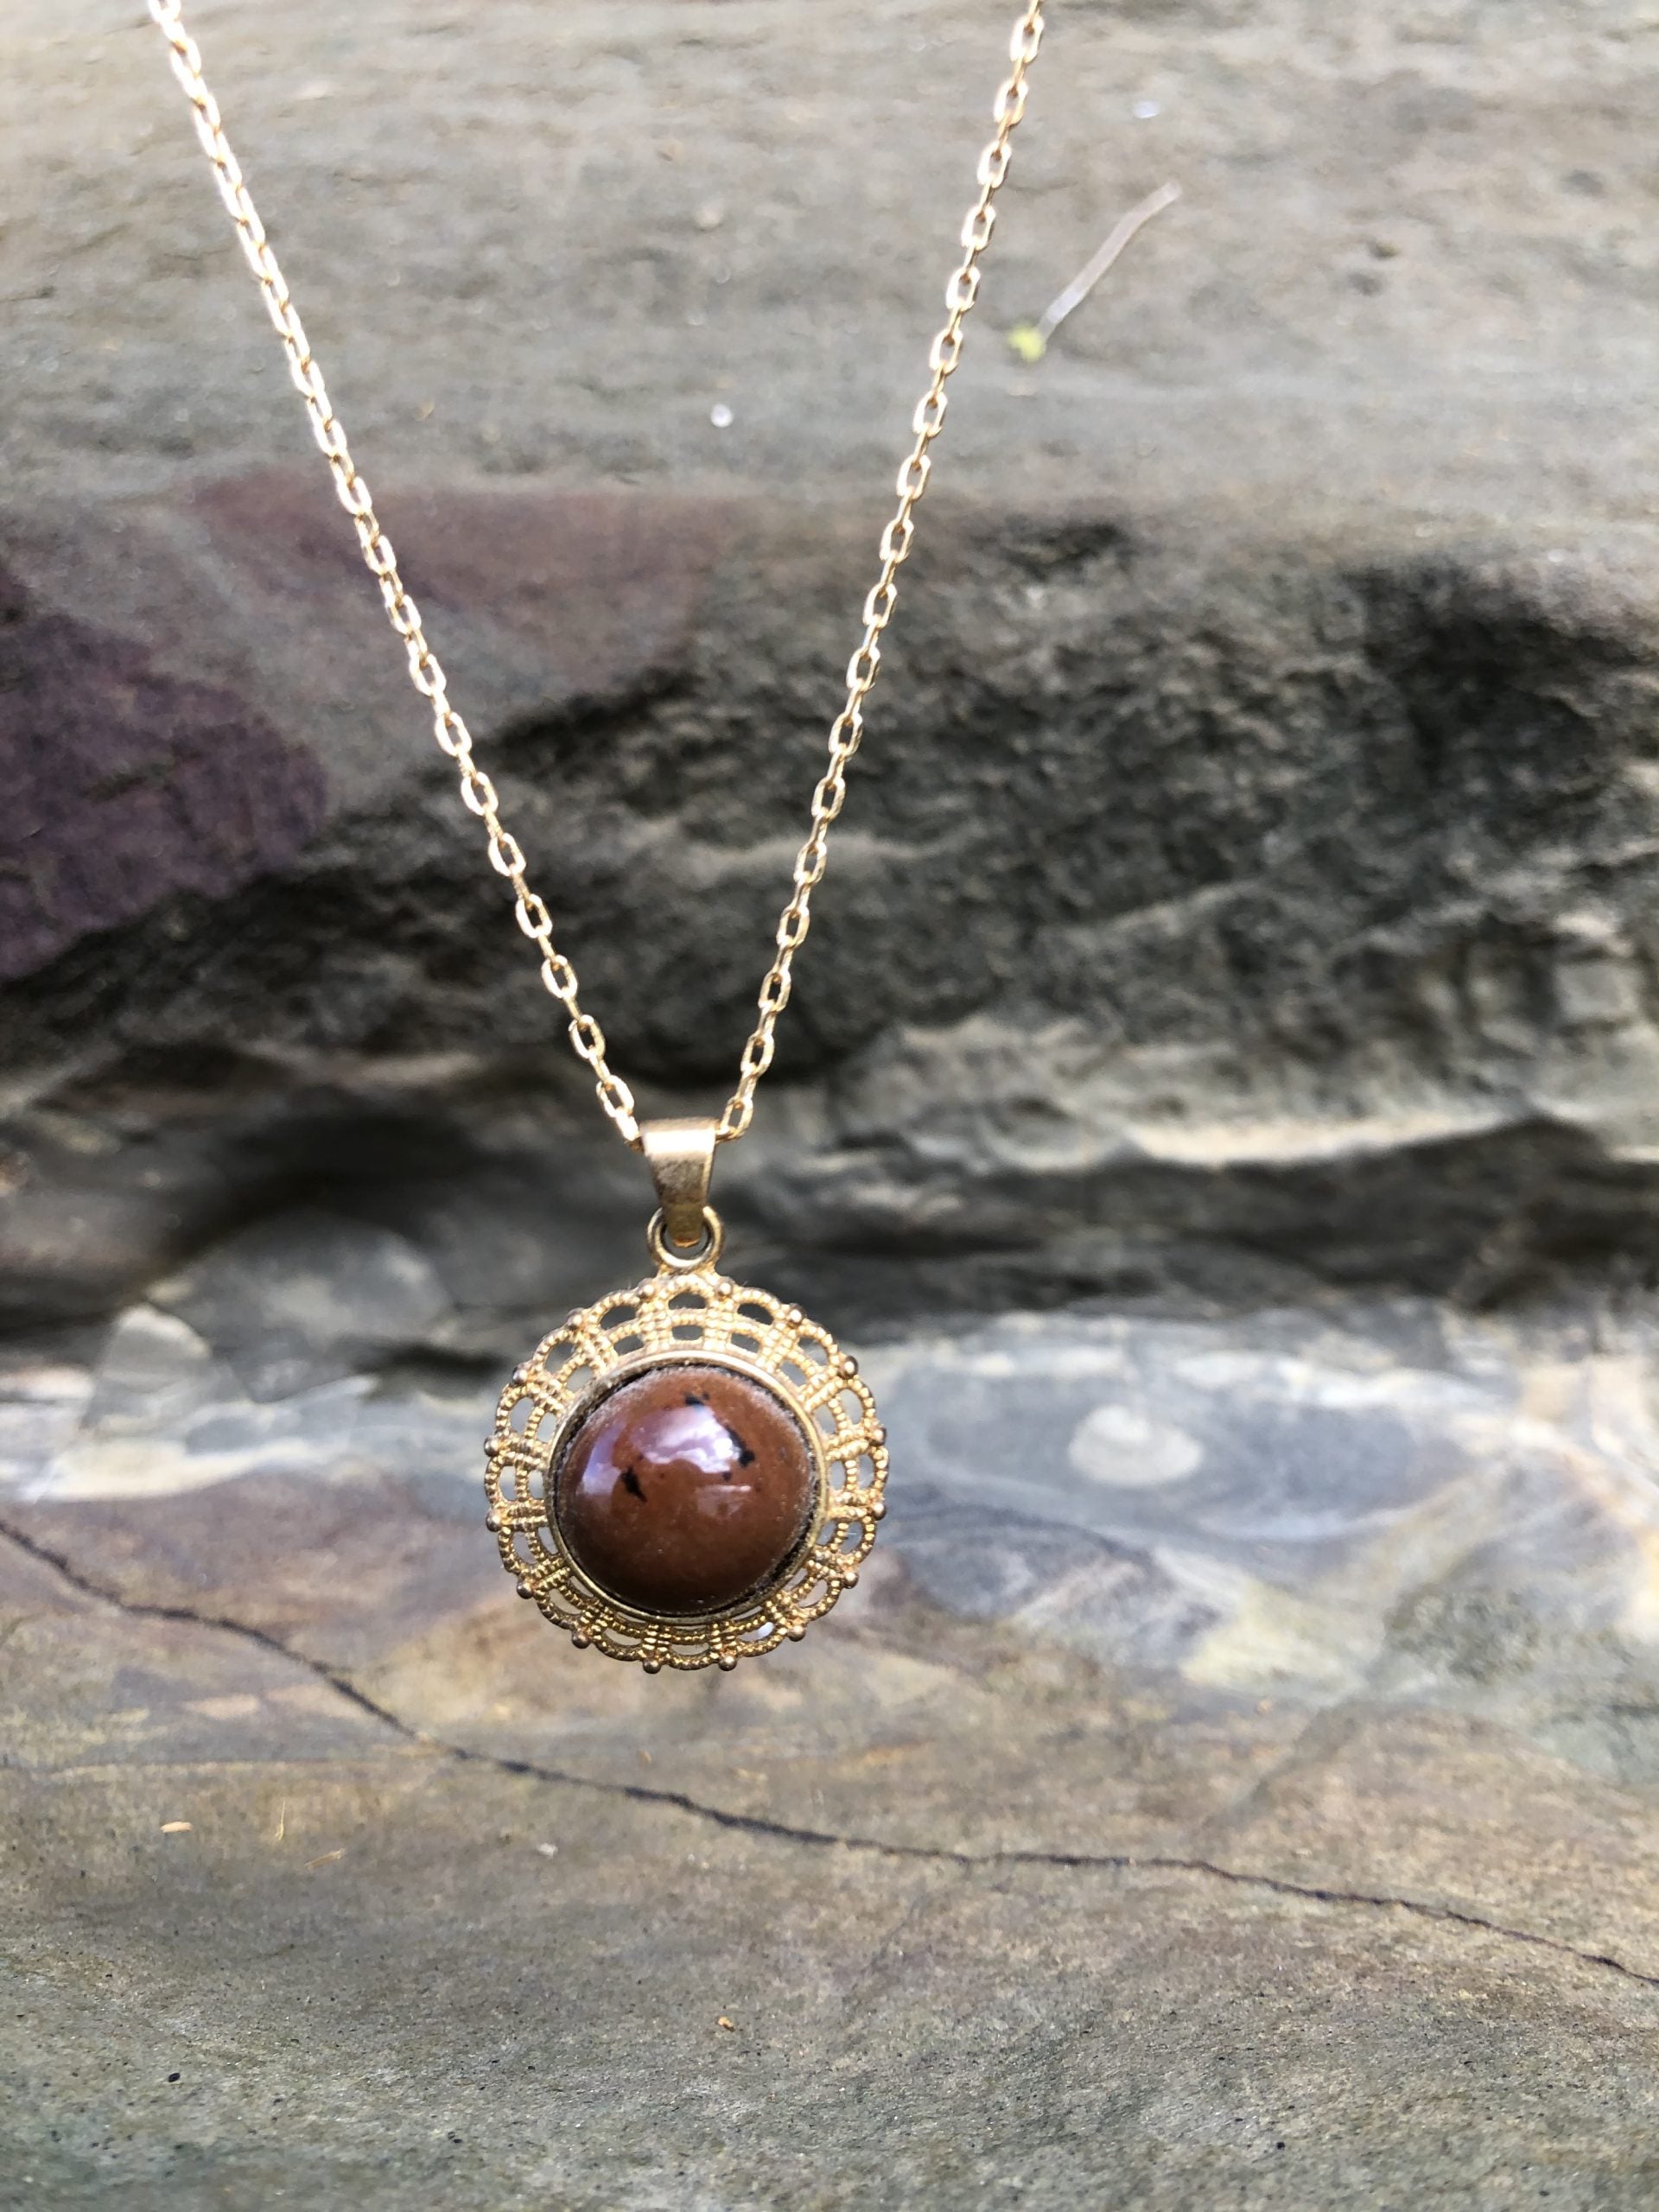 Necklace with New Zealand Mahogany obsidian, redish-brown with black spots, hand polished to a 14mm round cabochon and set in a gold plated setting with 19 inch chain, on rocks